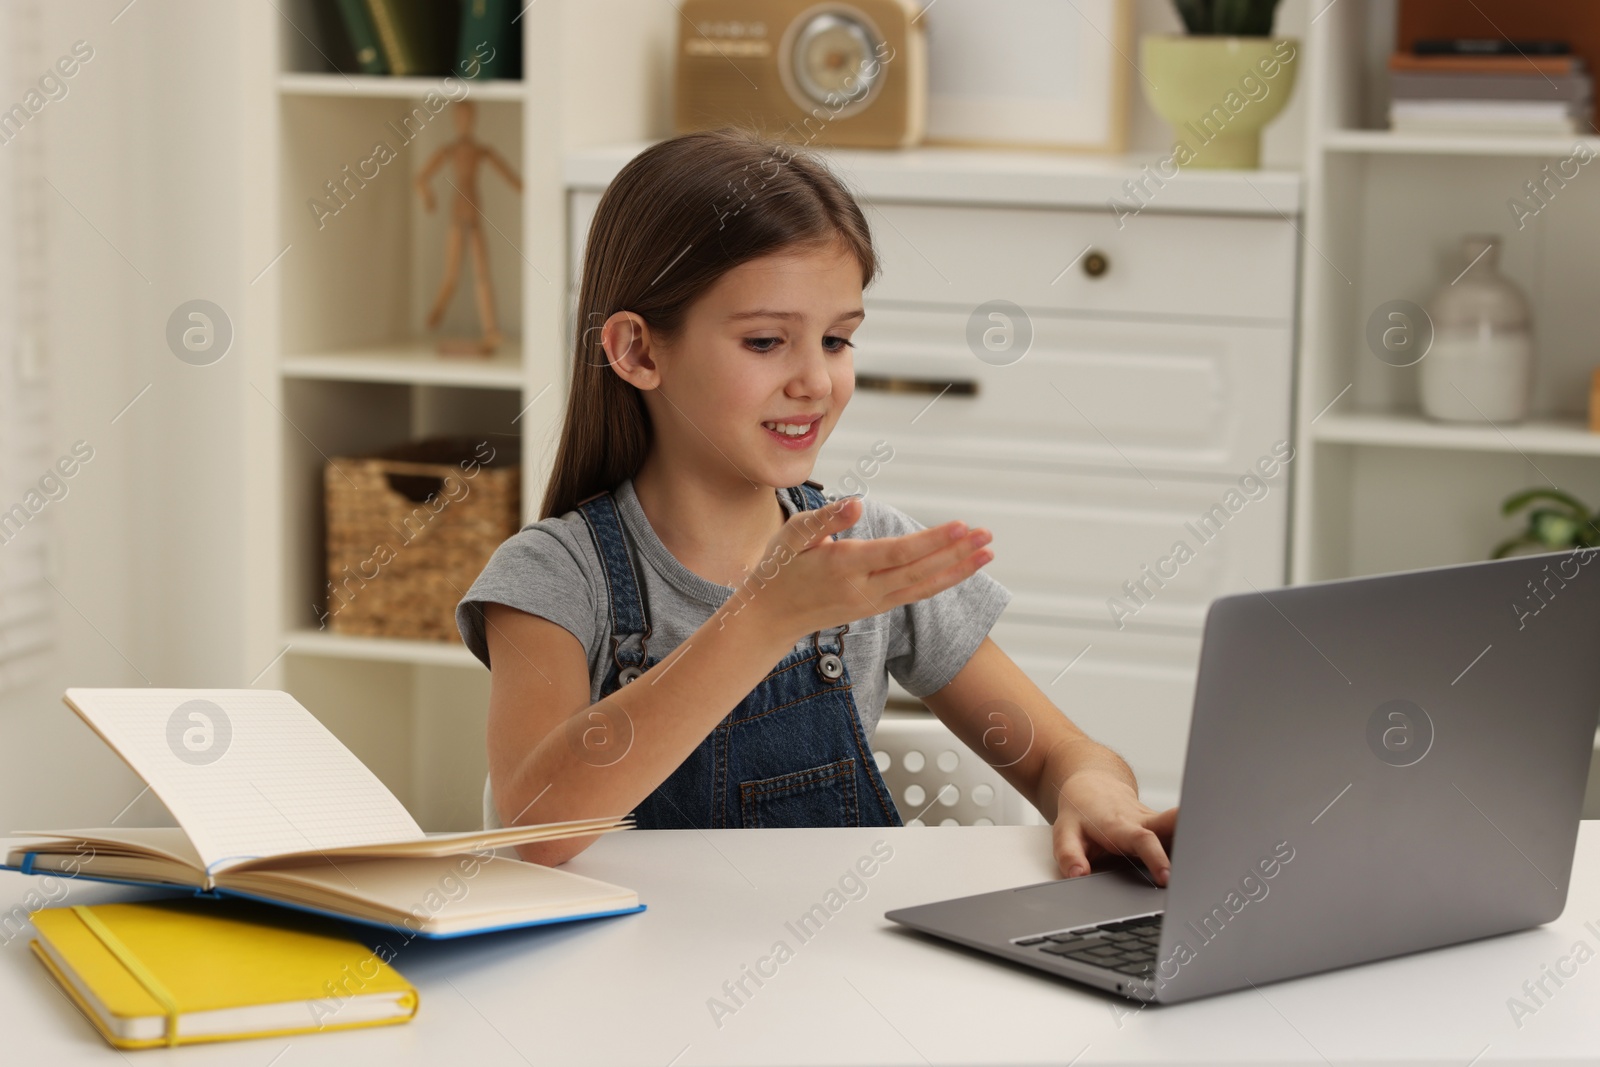 Photo of Cute girl using laptop at white table indoors